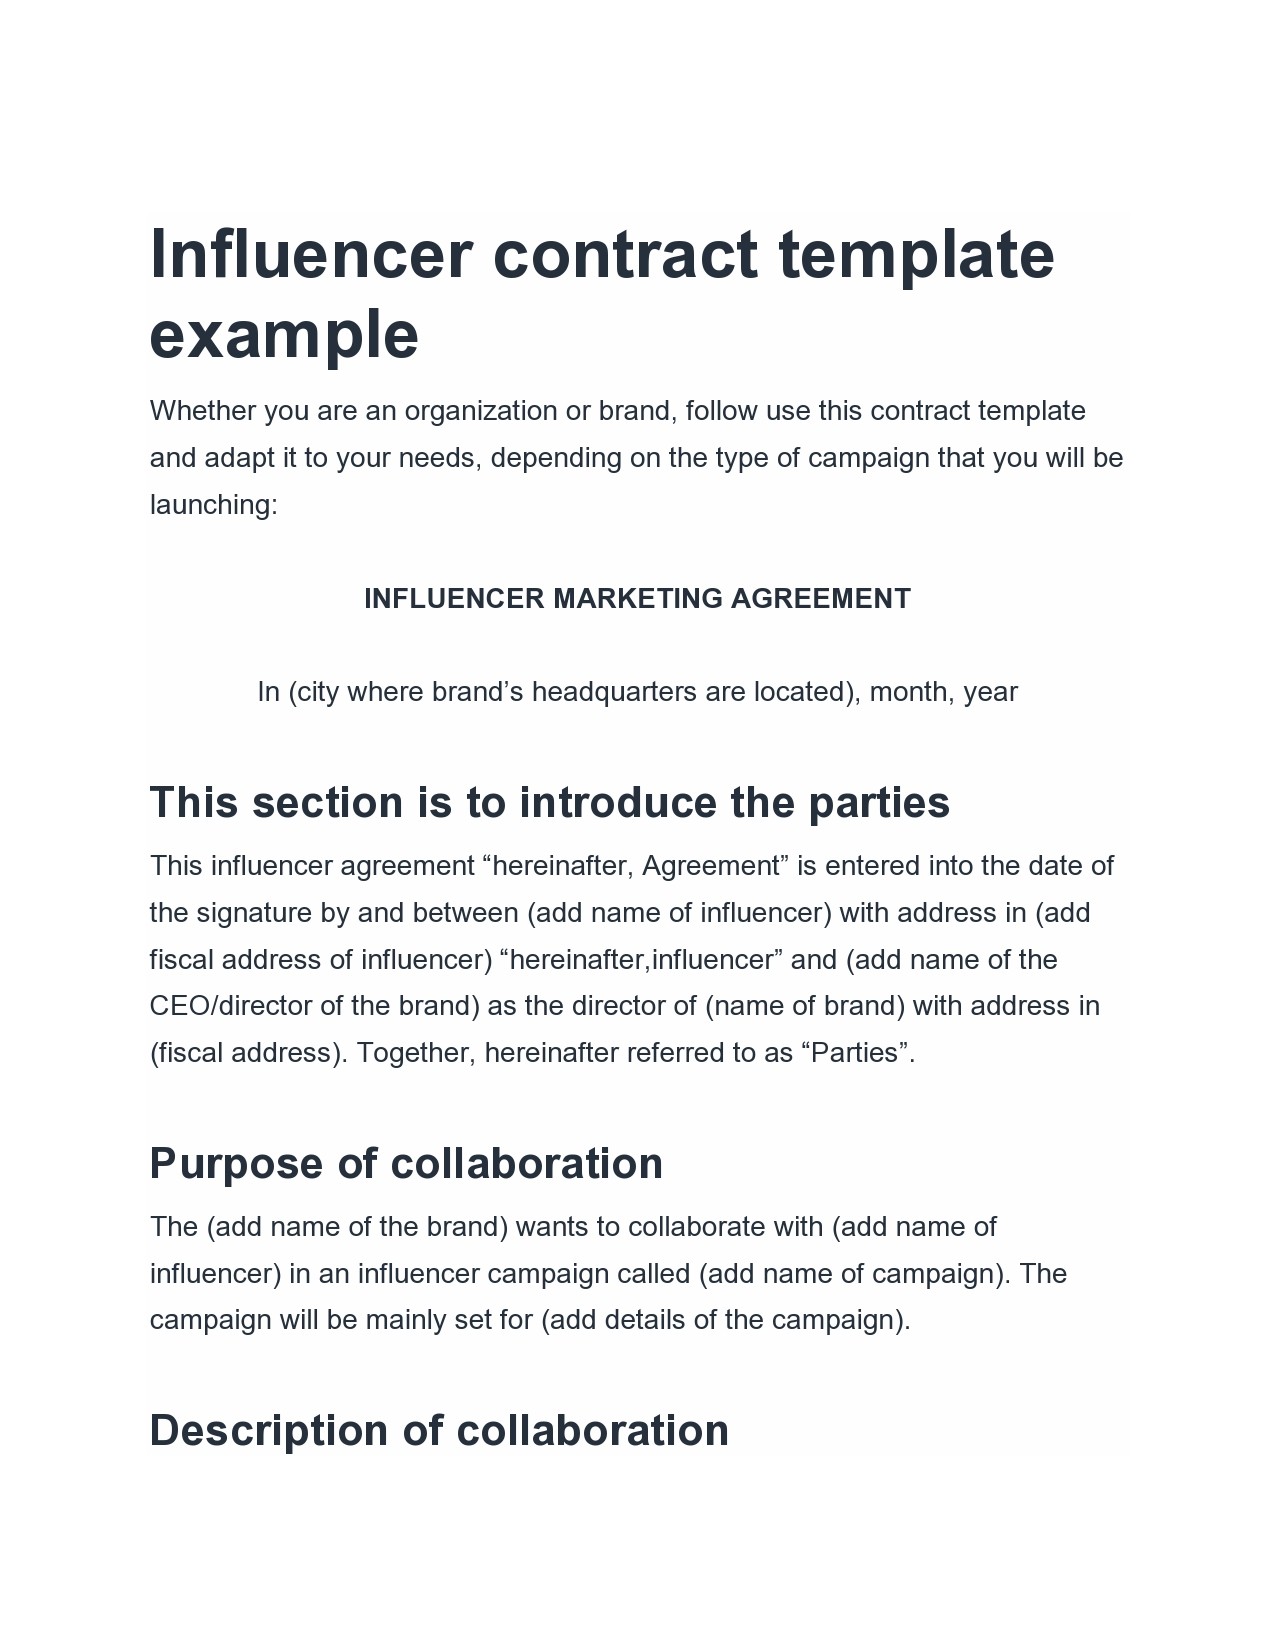 Free influencer contract template 08